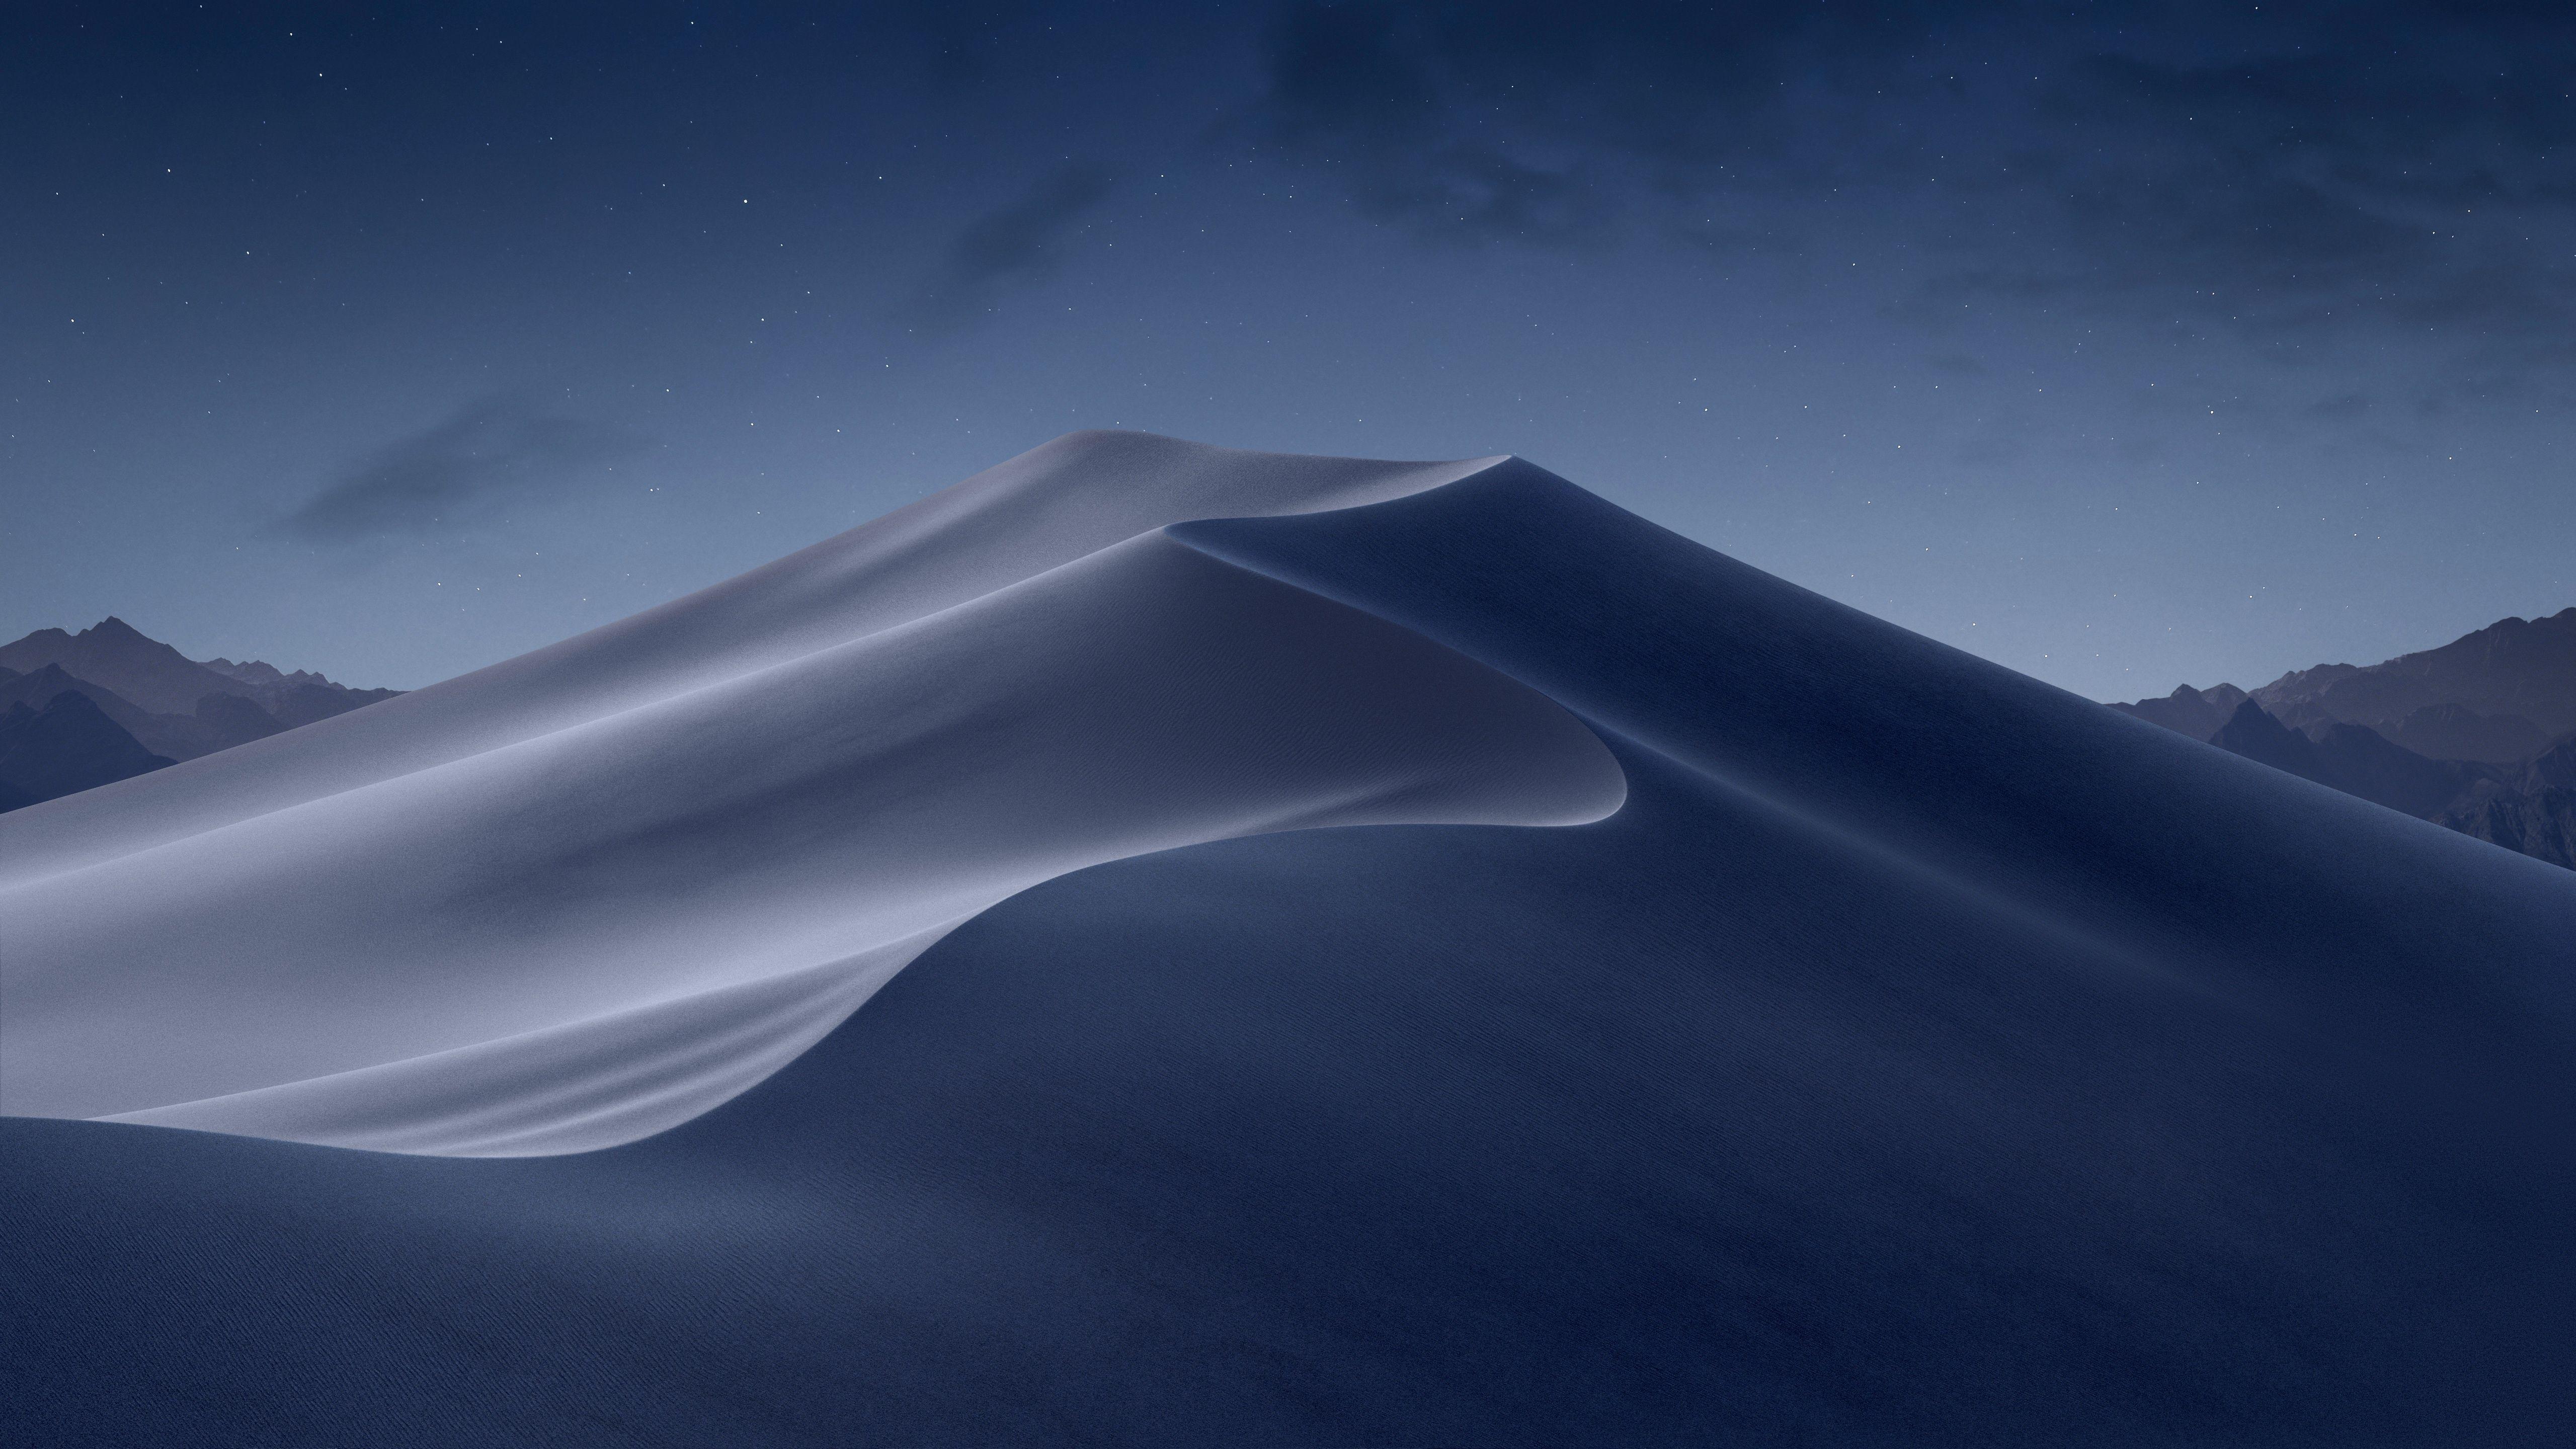 Mac Os Mojave Wallpapers Top Free Mac Os Mojave Backgrounds Wallpaperaccess